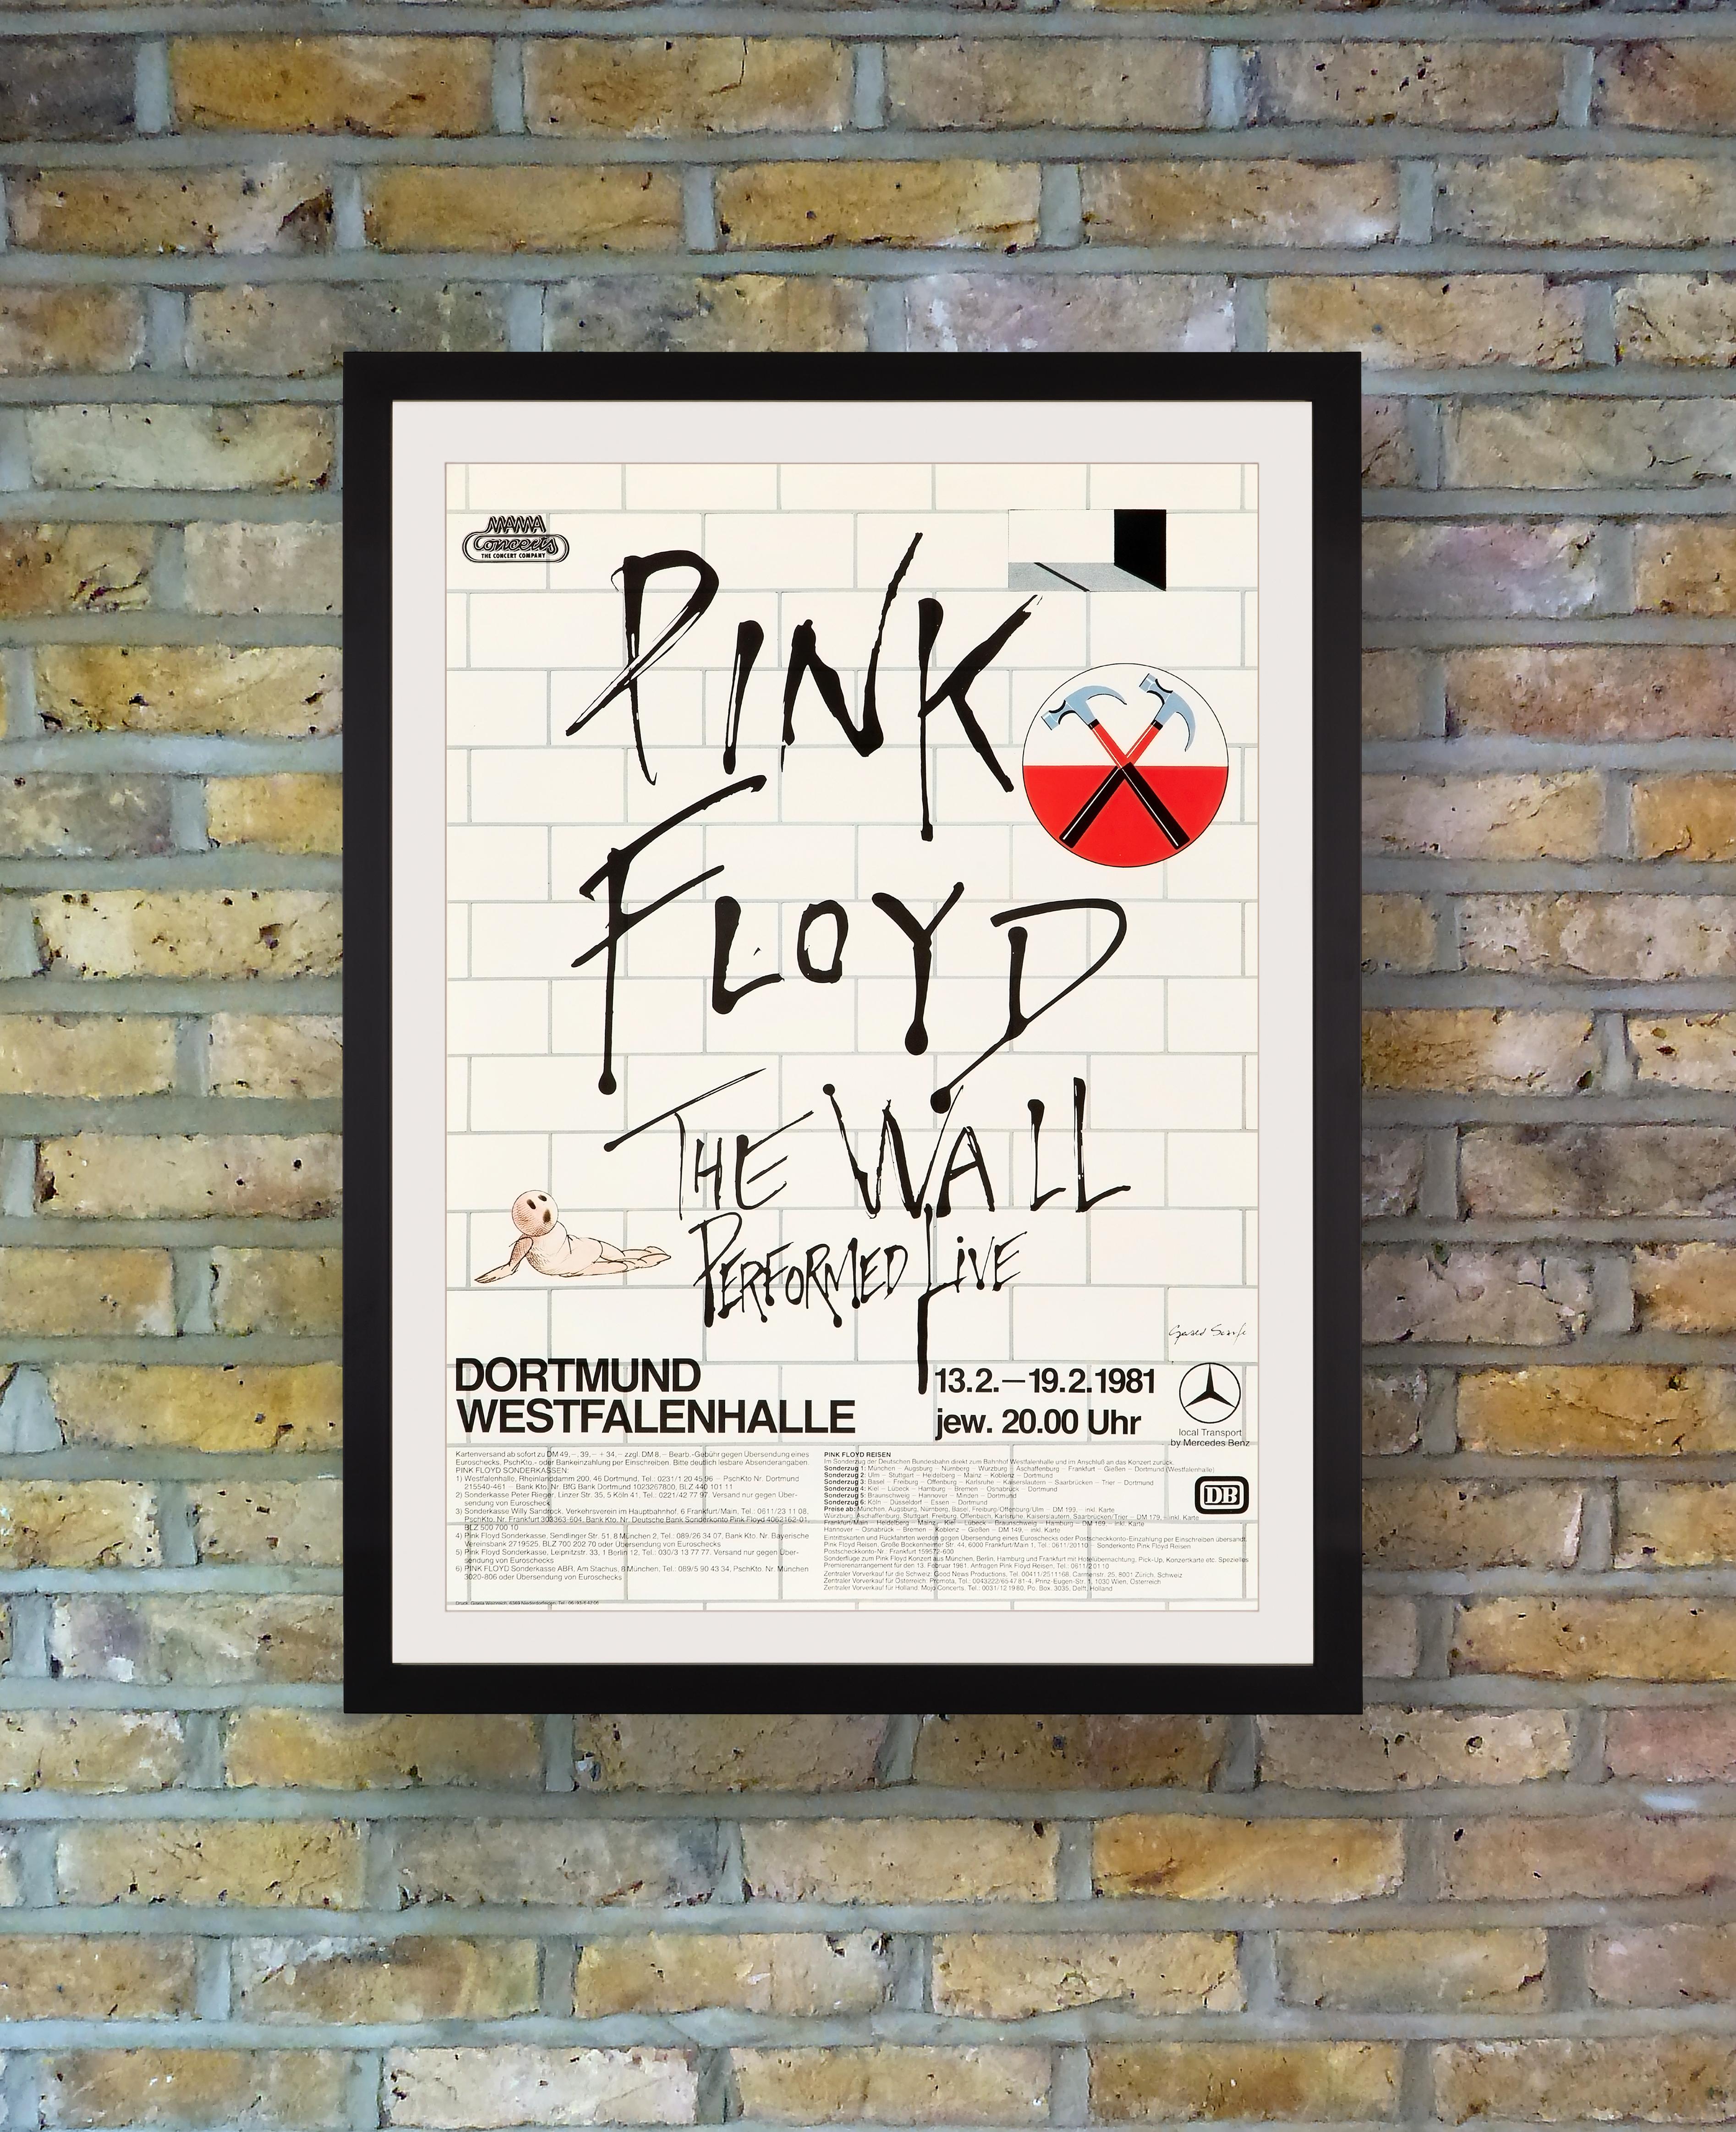 A tour poster for a series of performances of The Wall by Pink Floyd at the Westfalenhalle, Dortmund, Germany, from 13th-19th February 1981. Based on a narrative concept by Roger Waters, Pink Floyd's seminal 1979 album 'The Wall' had sprung from